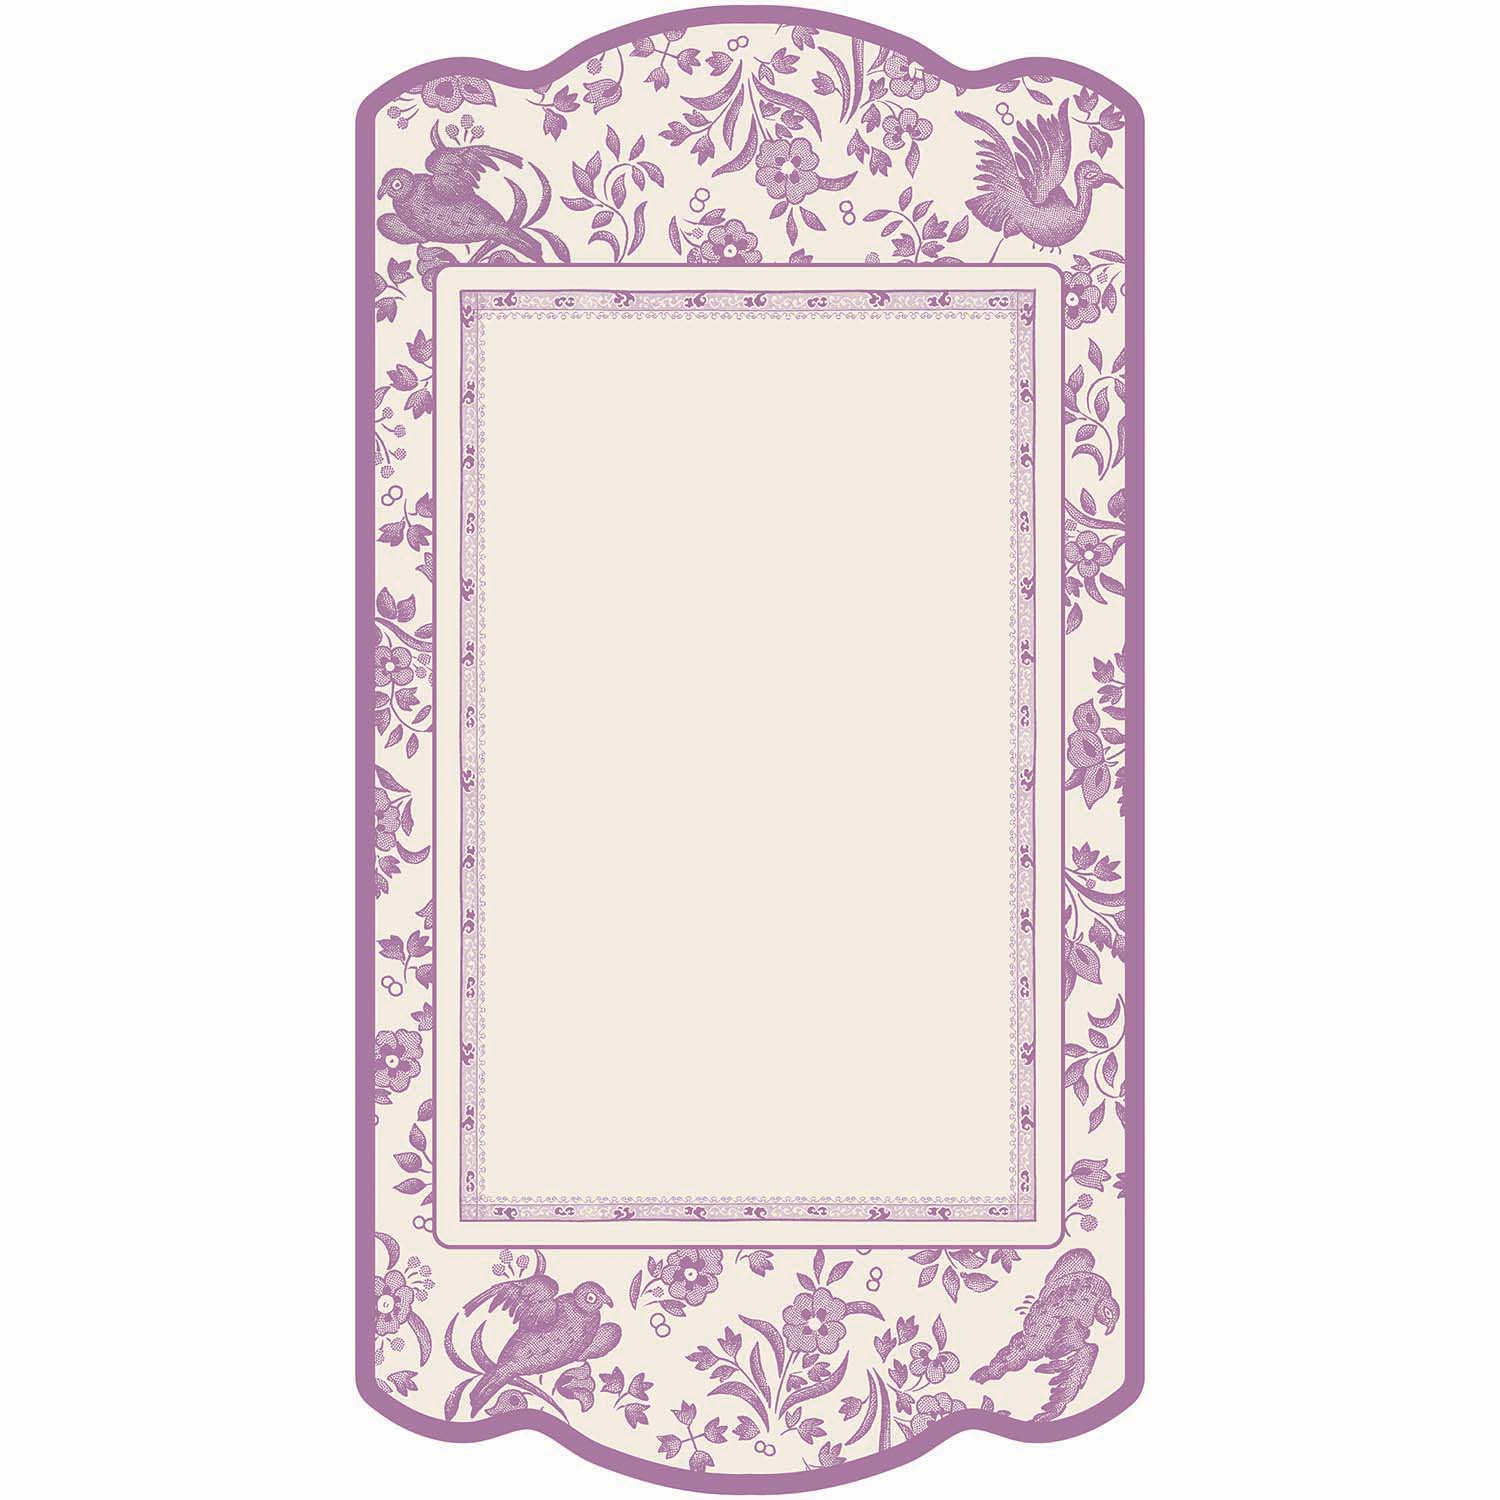 A die-cut rectangular card framed by a lilac purple vintage Burleigh-style design of birds, flowers and filagree. The center is a blank white rectangle for personalization.